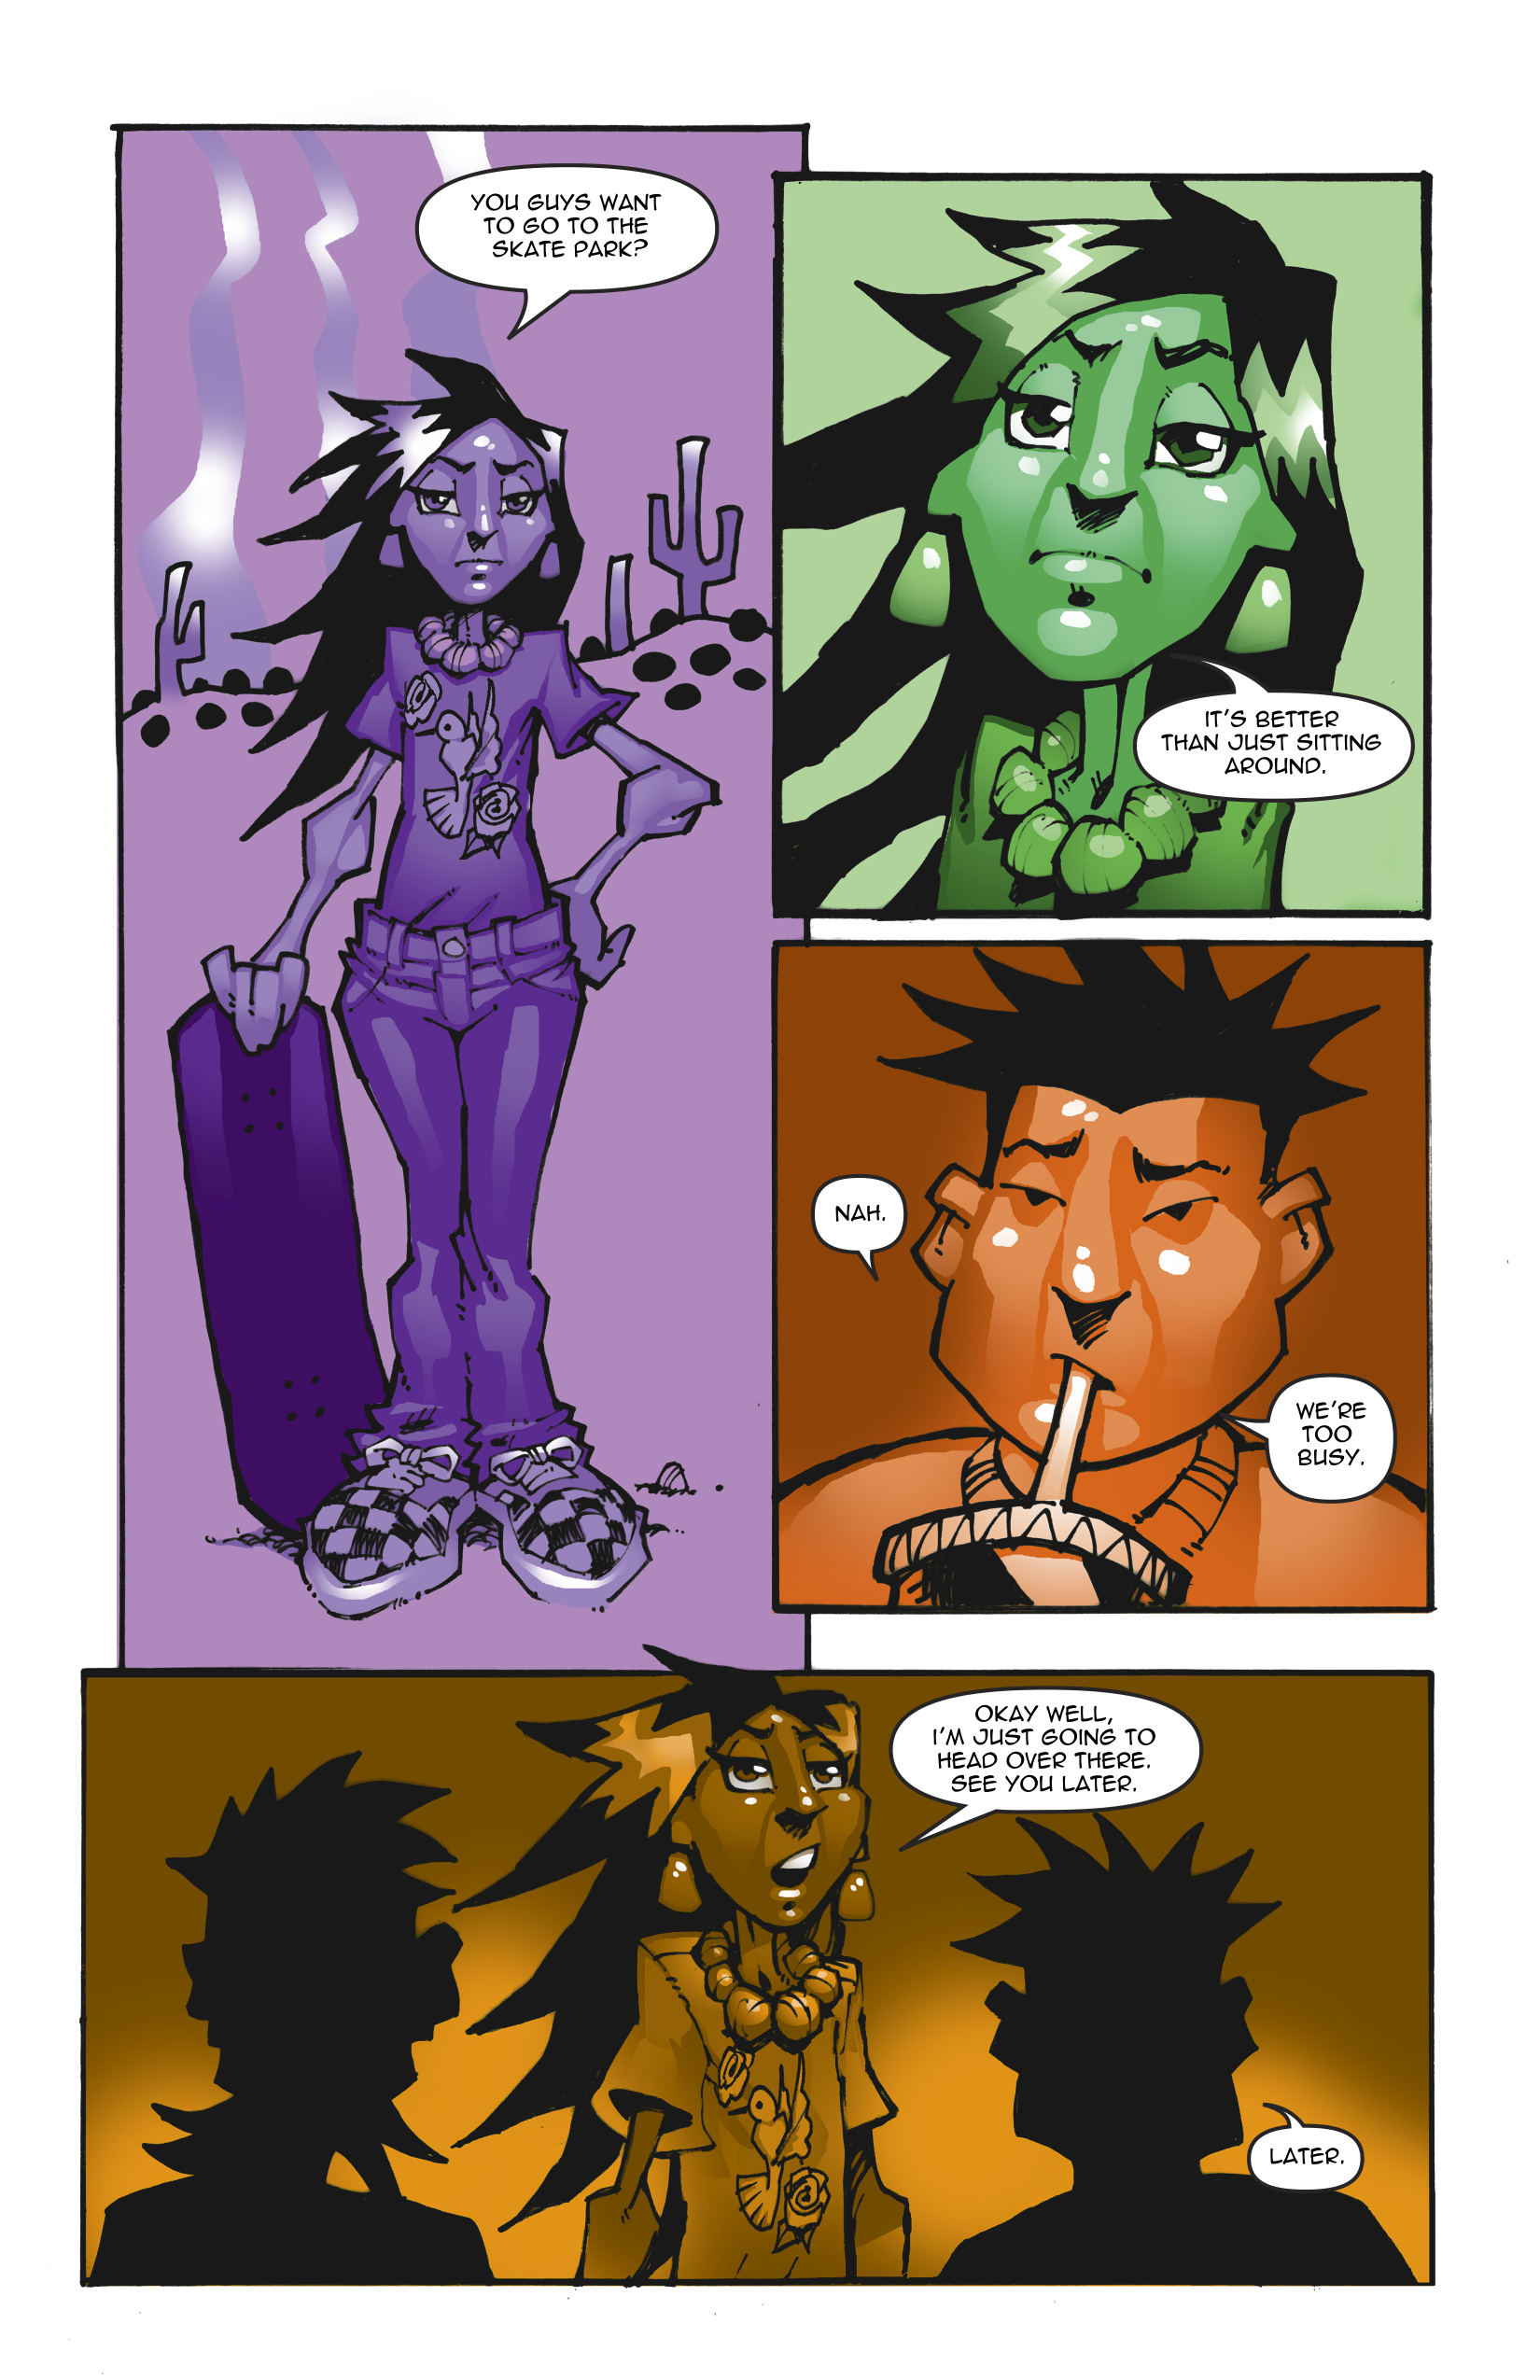 Page 6. Samantha asks the boys to come with her to the skate park, but they don't want to. They say they are too busy.